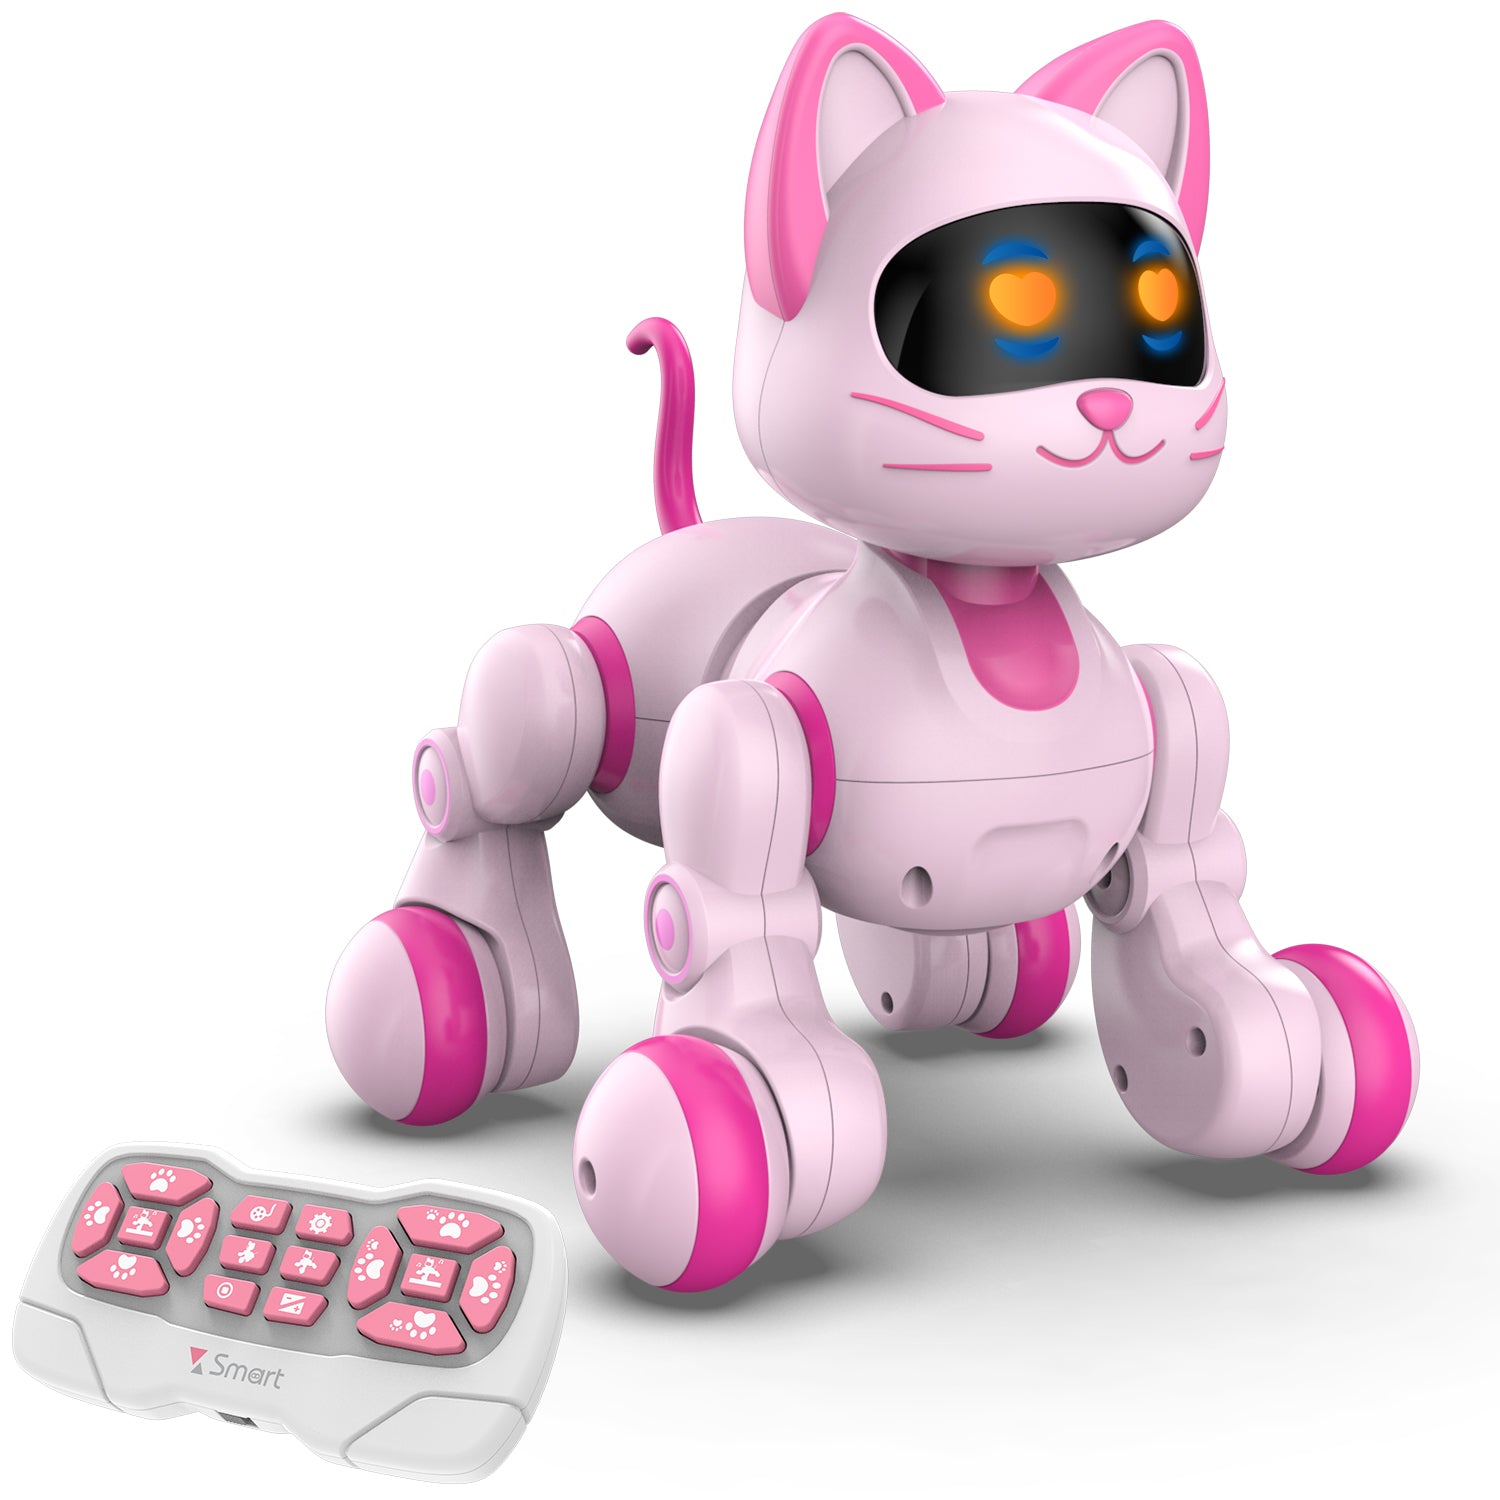 Programmable Remote Control Robot Cat